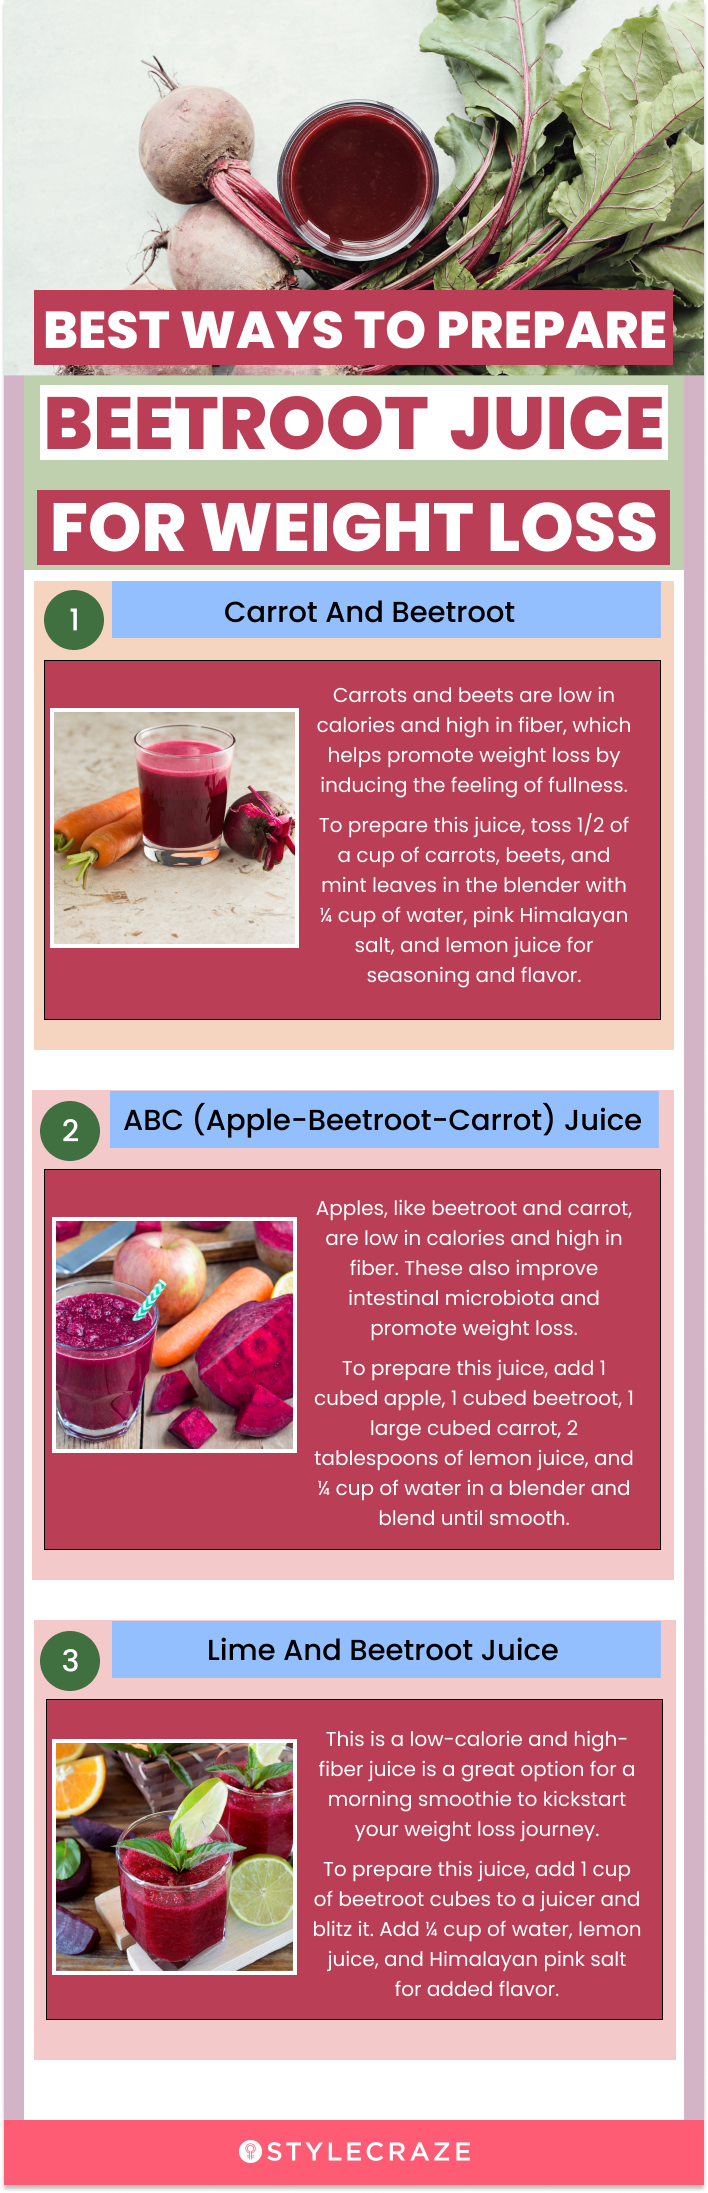 best ways to prepare beetroot juice for weight loss (infographic)